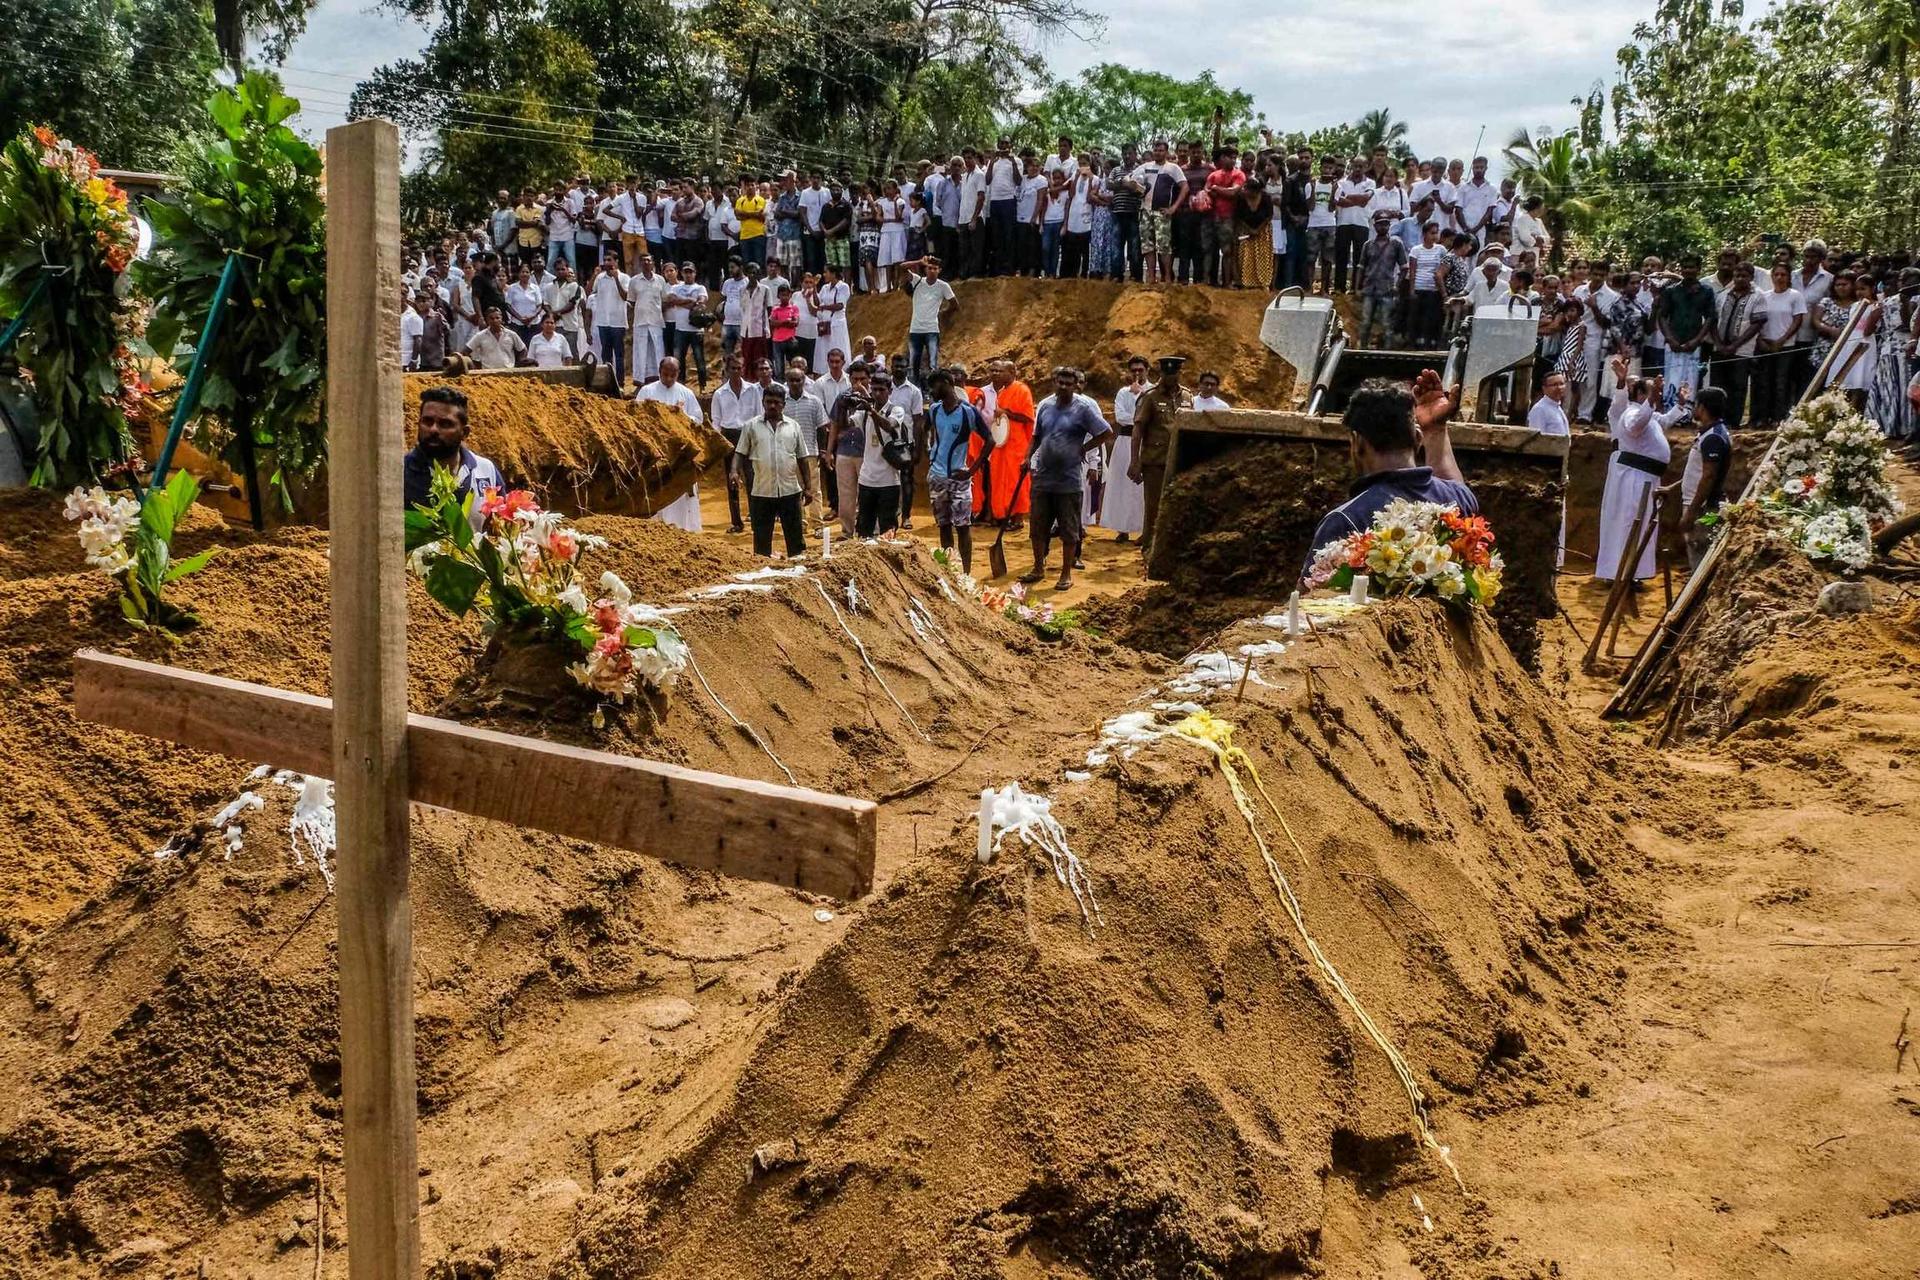 A crowd of people watch as a backhoe moves dirt over caskets during a mass funeral